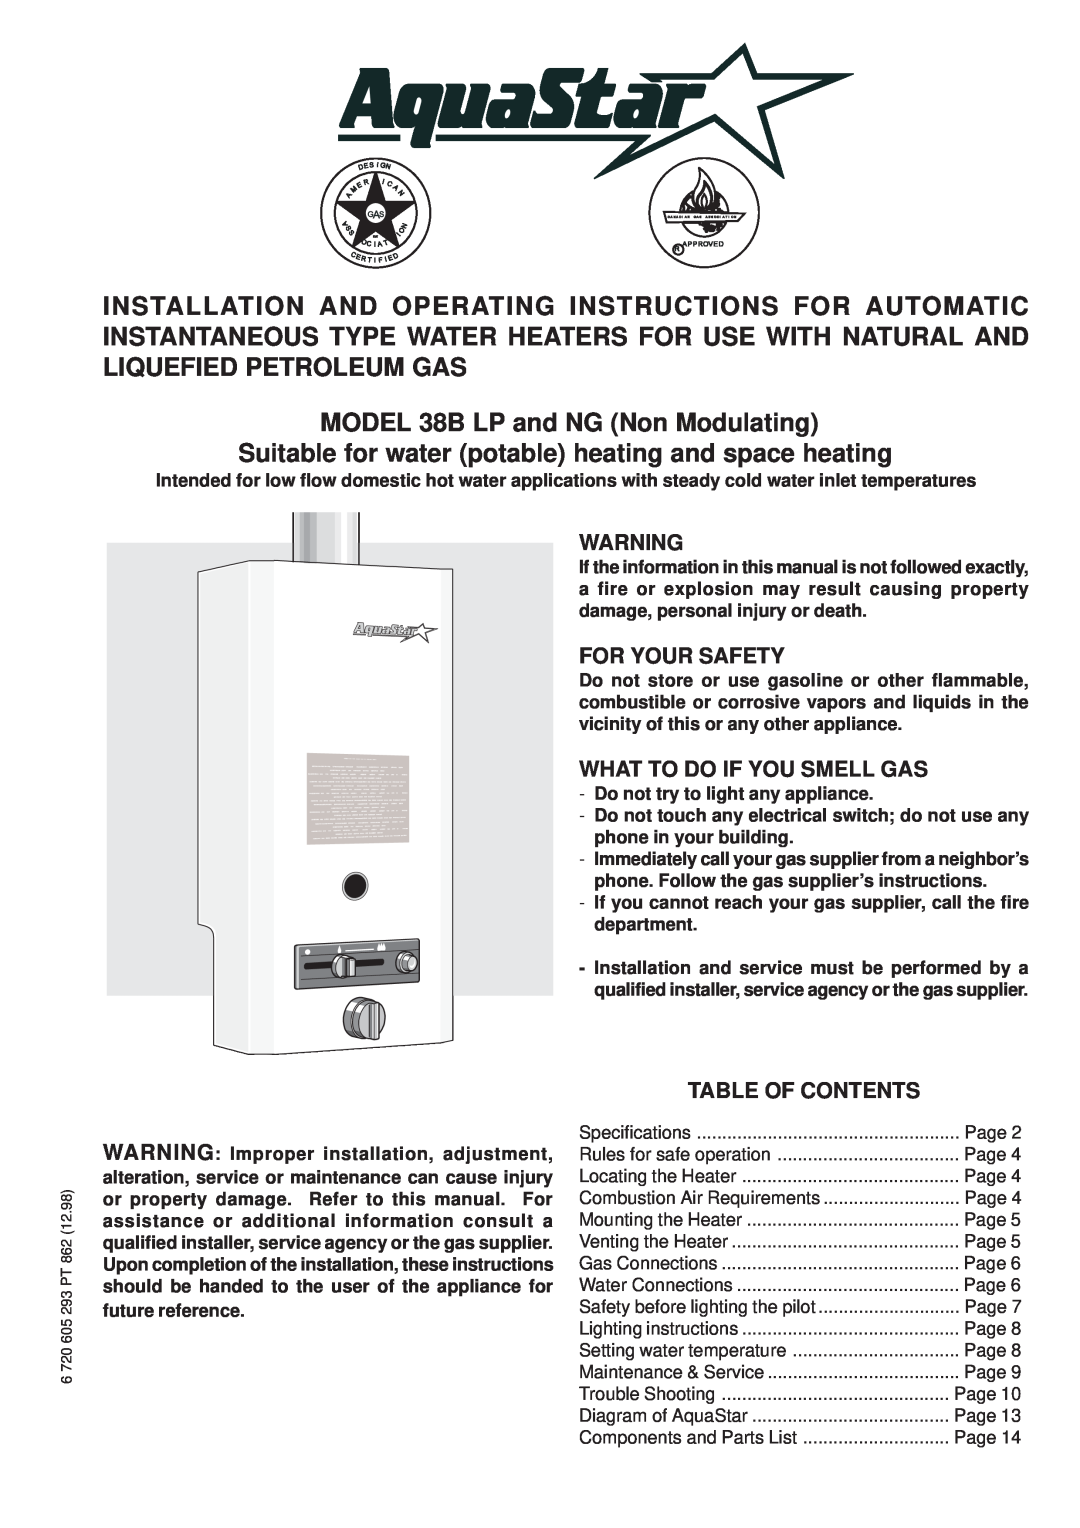 AquaStar specifications MODEL 38B LP and NG Non Modulating, Suitable for water potable heating and space heating 